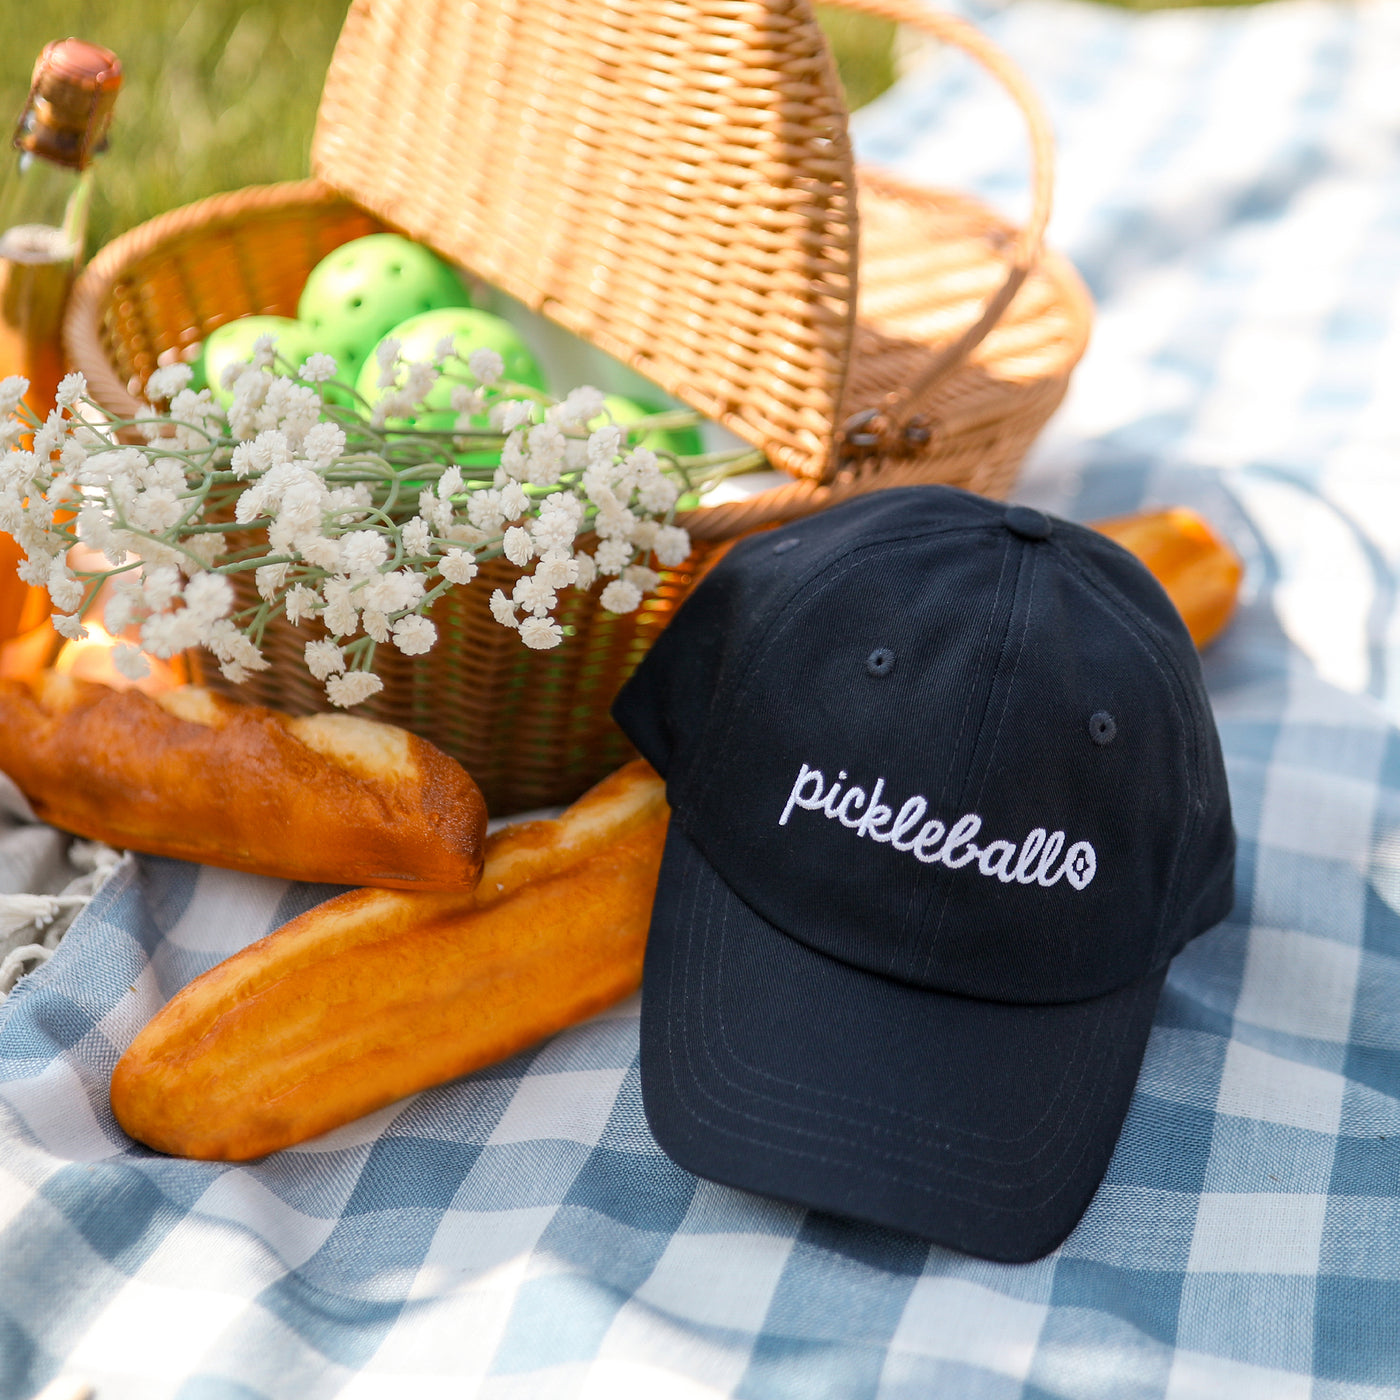 Navy baseball hat on picnic blanket next to basket full of pickleballs. Hat is embroidered with the word pickleball